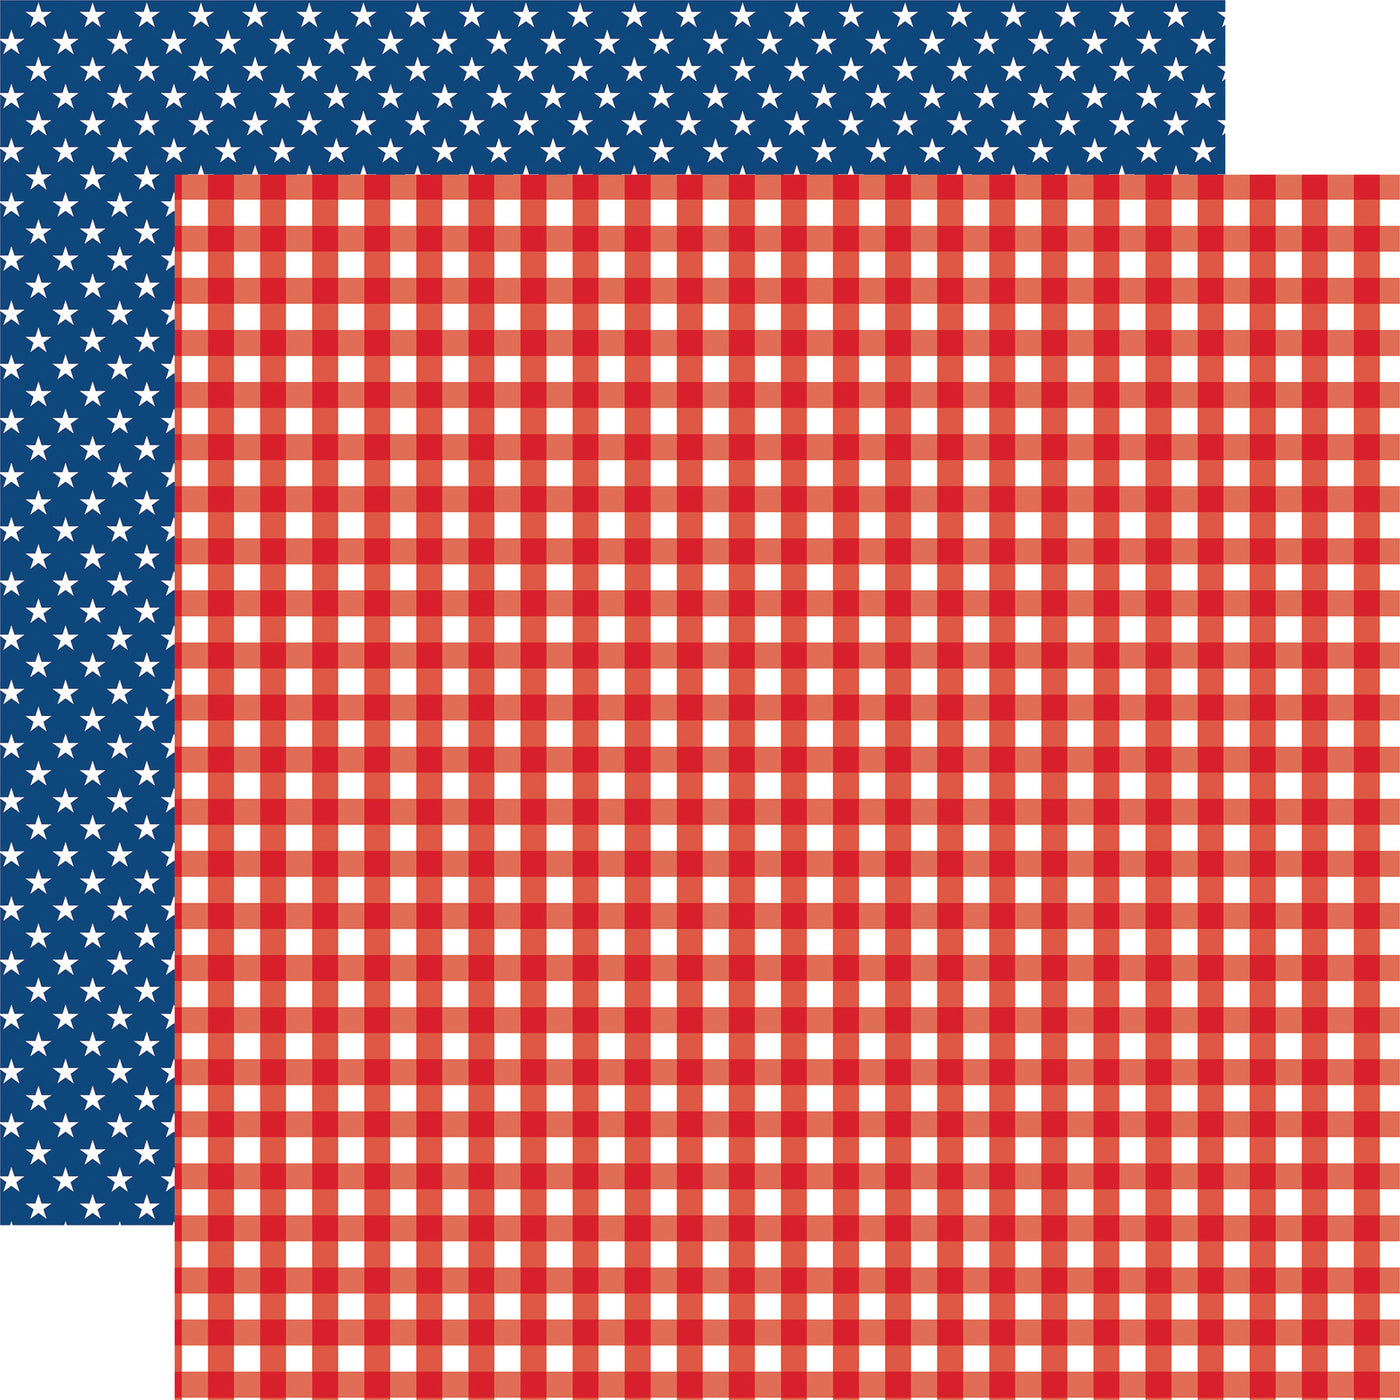 12x12 double-sided patterned paper - (Side A - red and white gingham; Side B - white stars on a blue background) - Echo Park Paper.